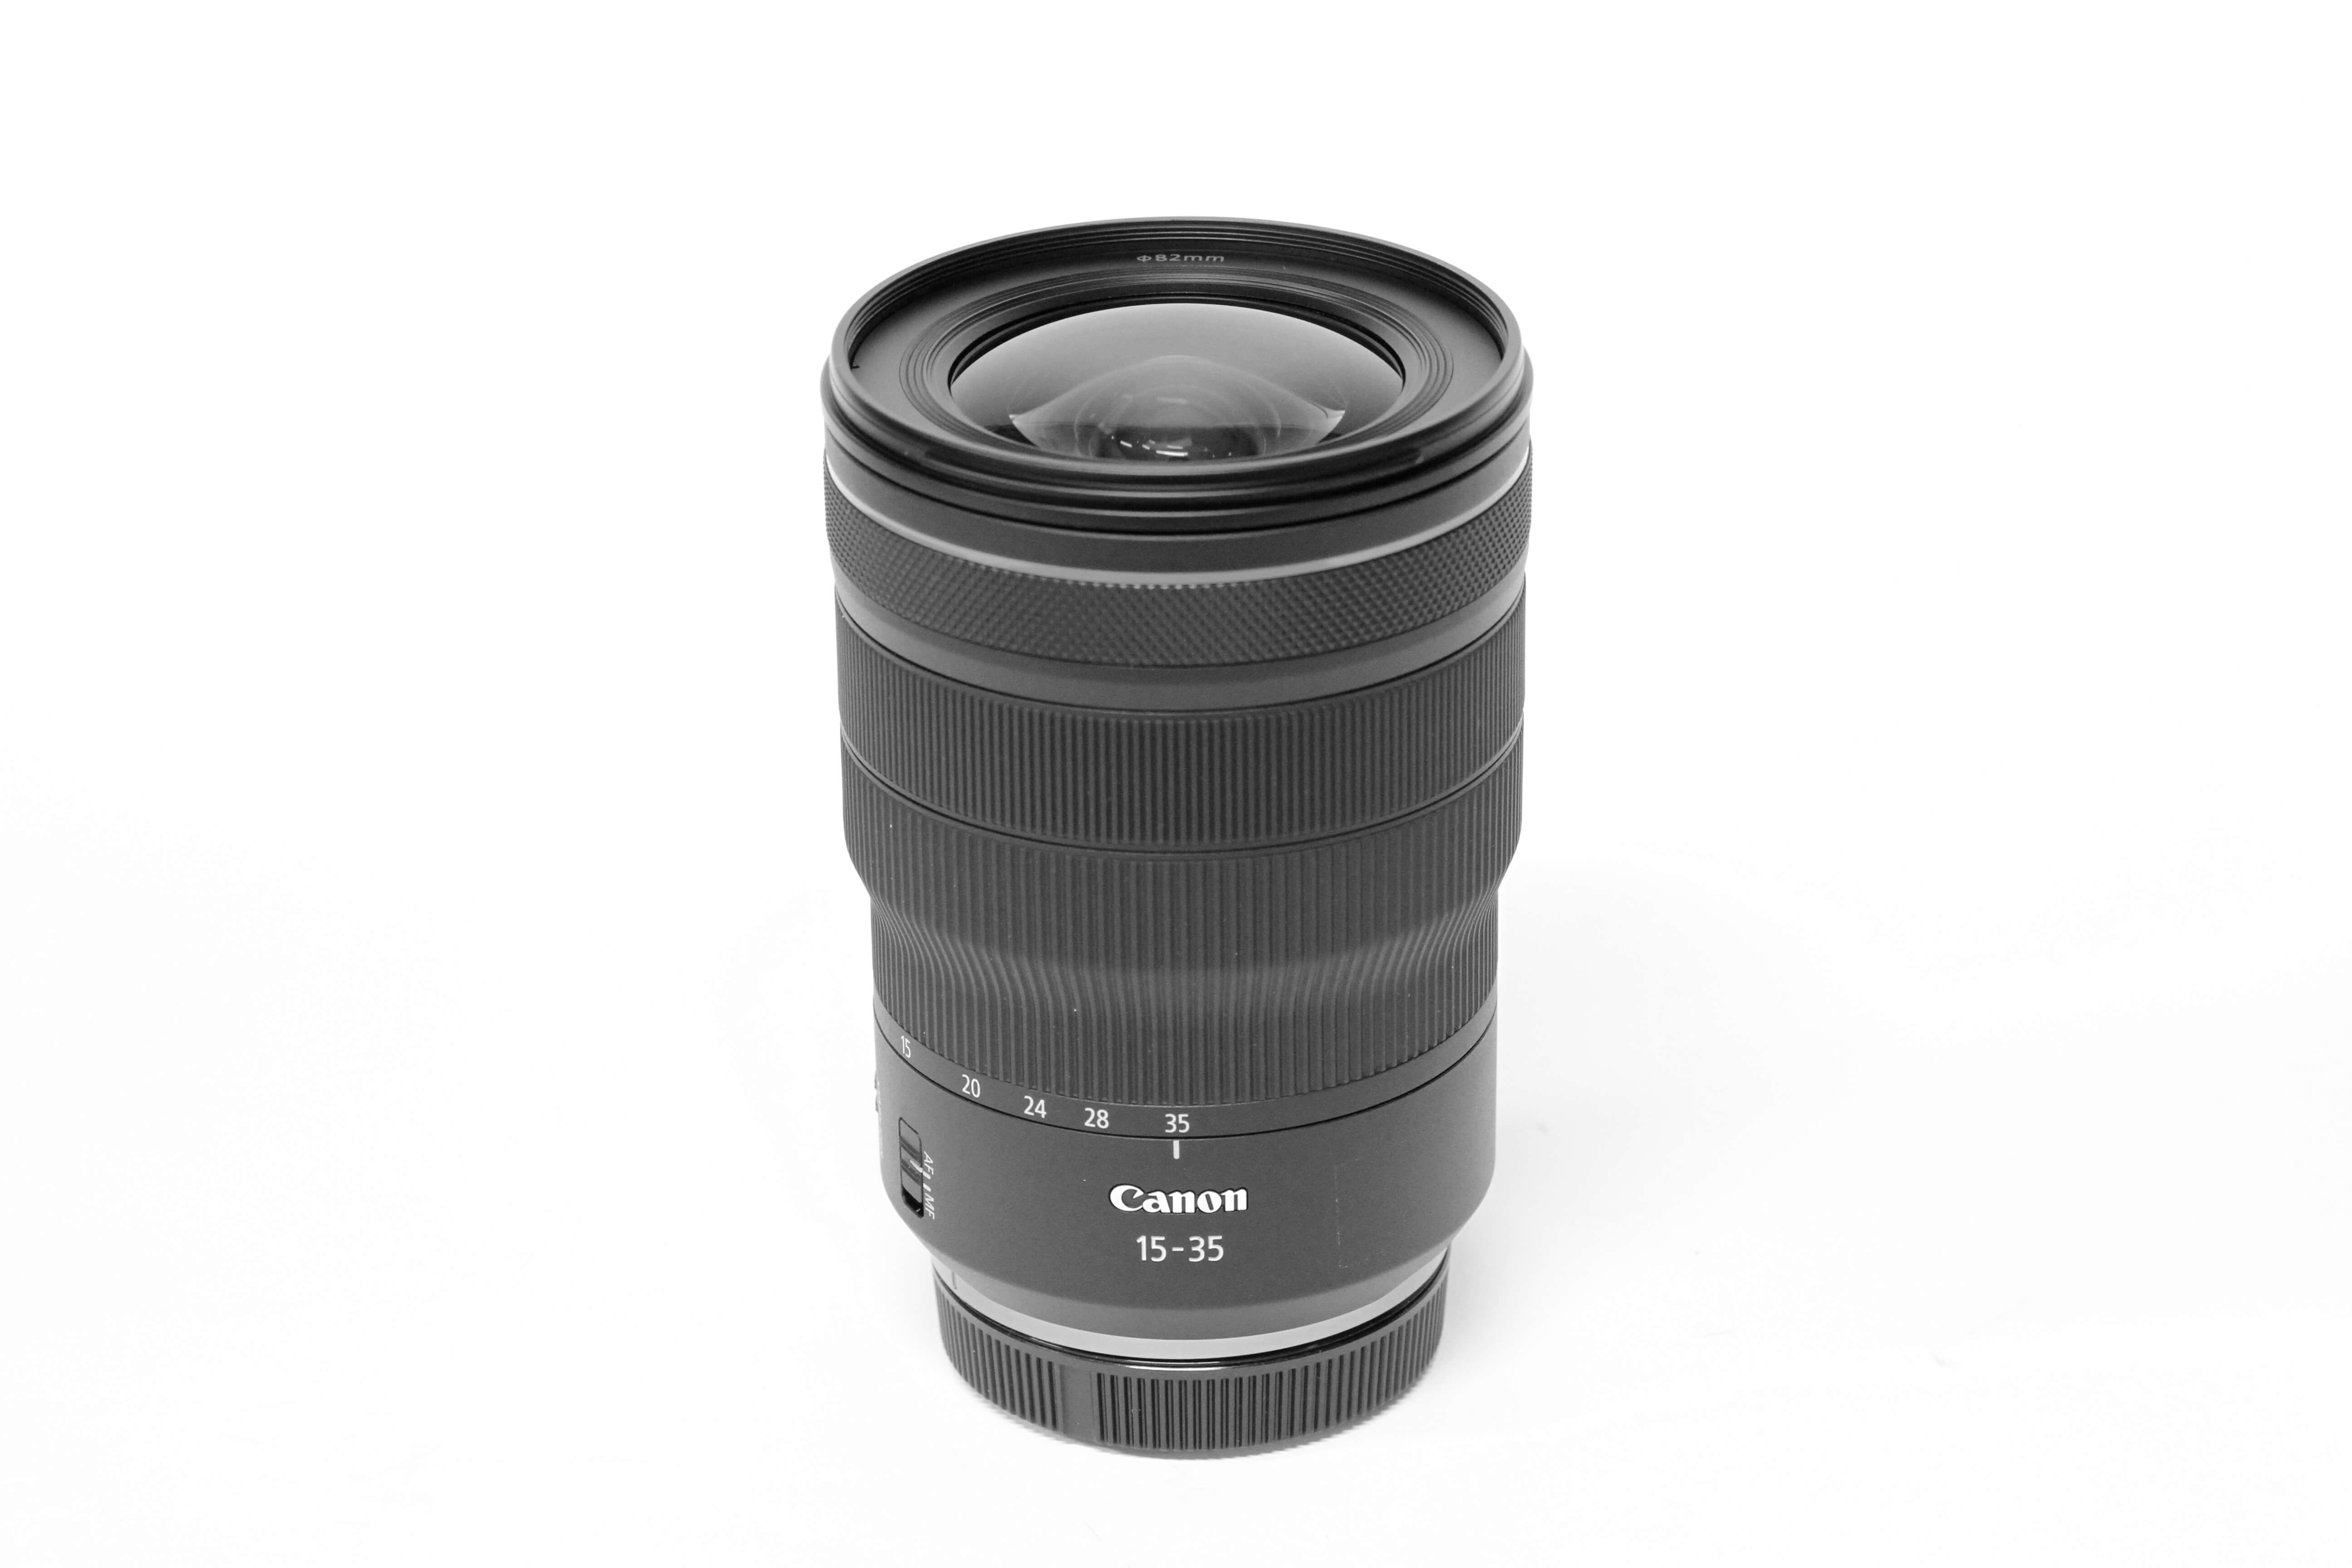 Canon RF15-35mm F2.8 L IS USM / 保護フィルター付